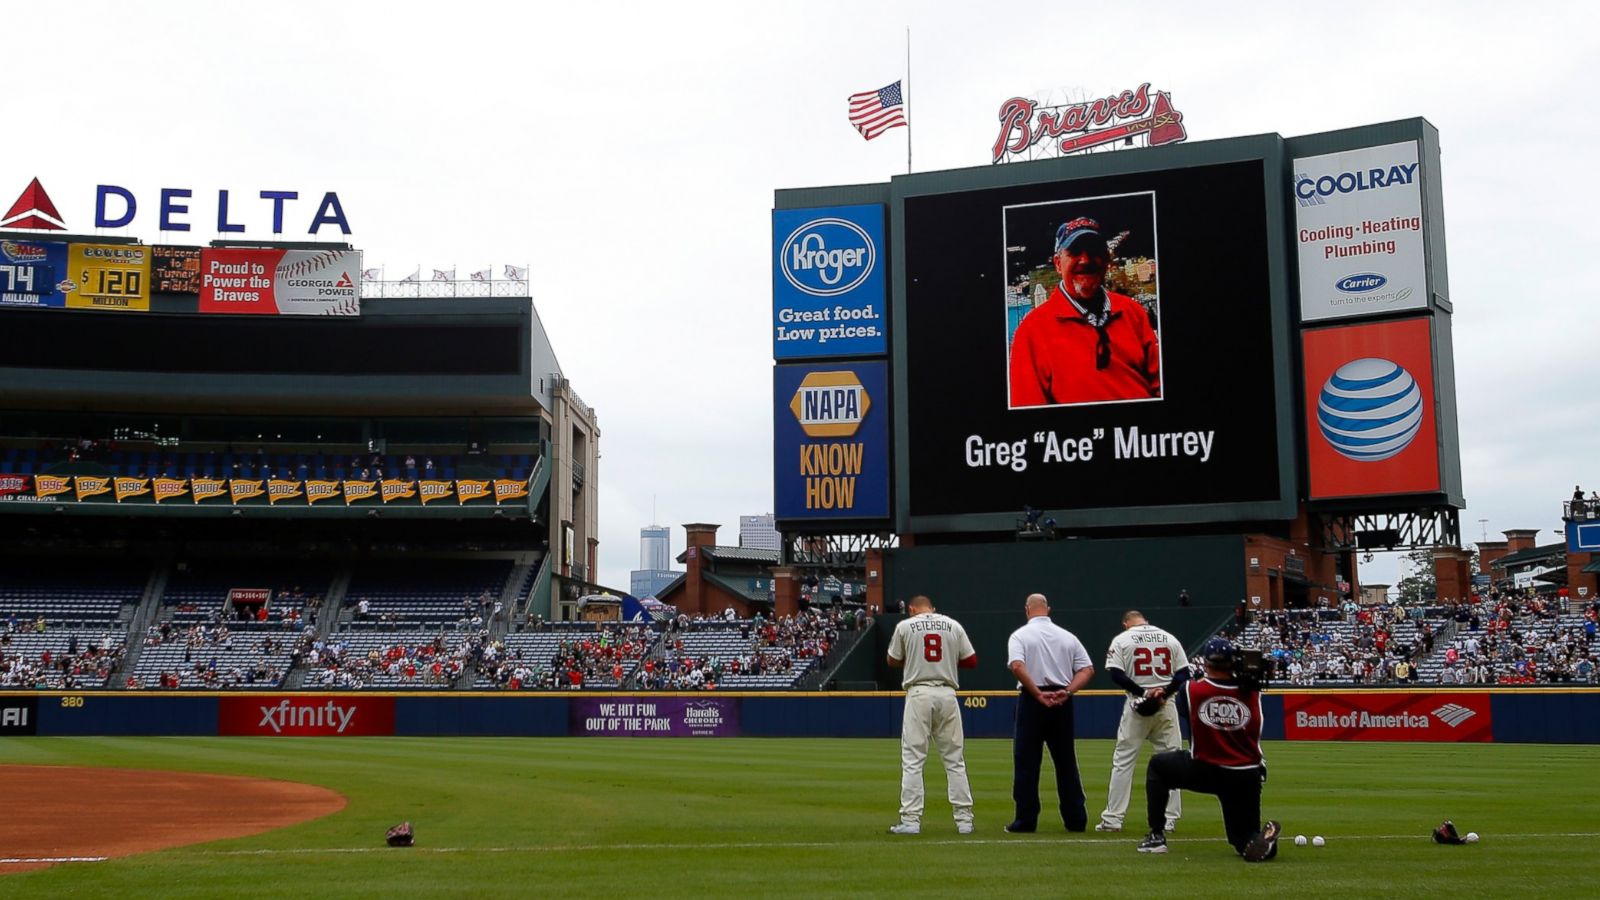 Baseball fan dies after falling from upper deck at Turner Field during  Braves game, US sports